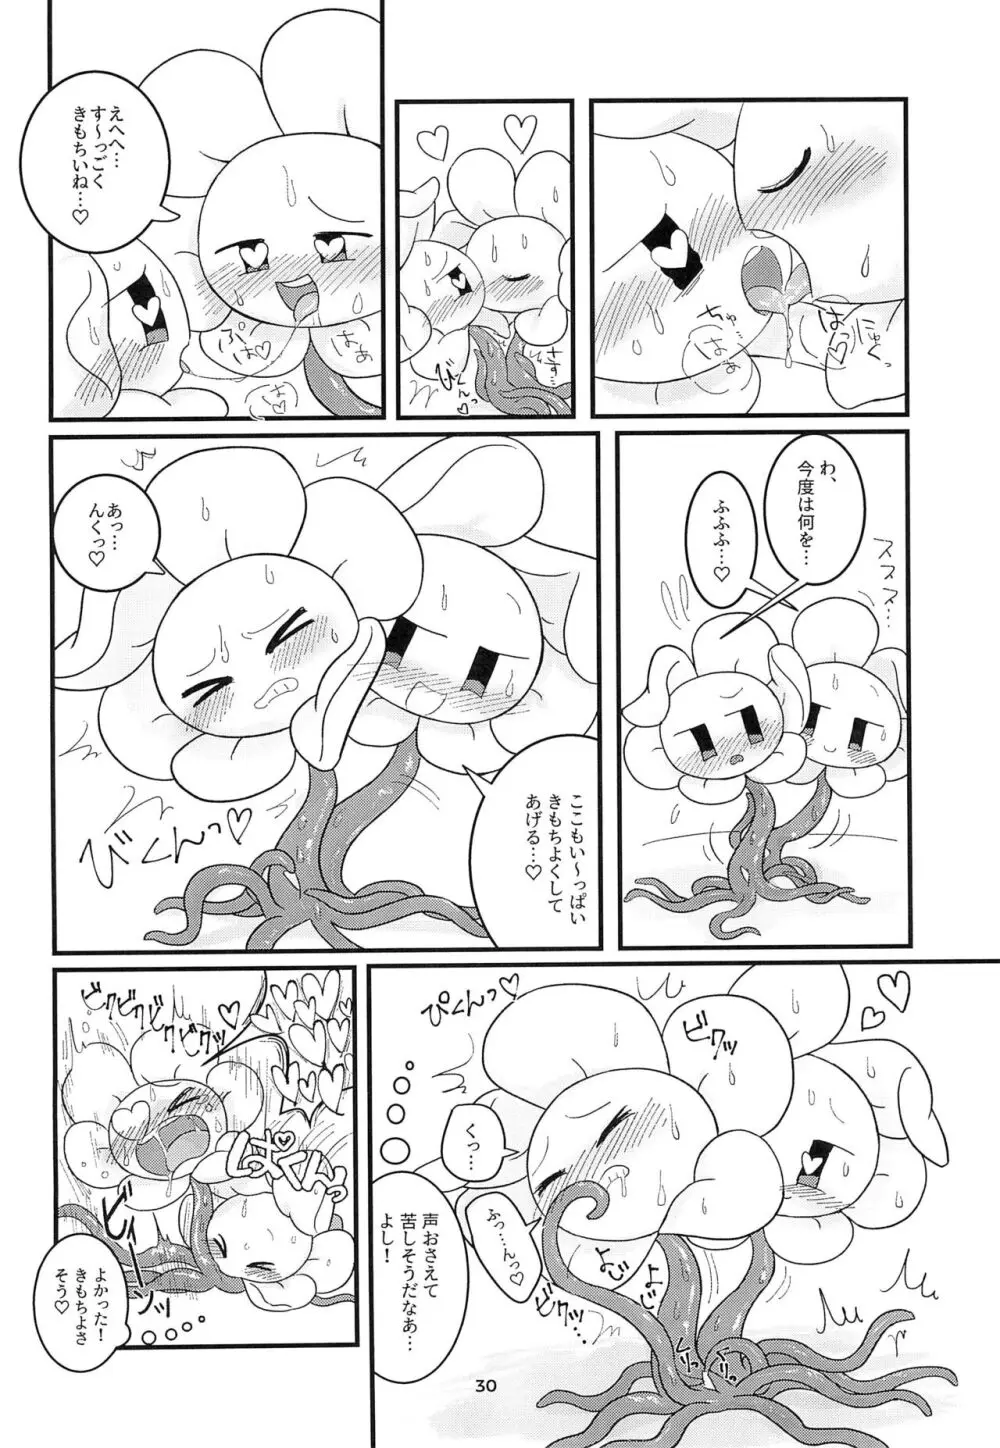 The Pollination - page30